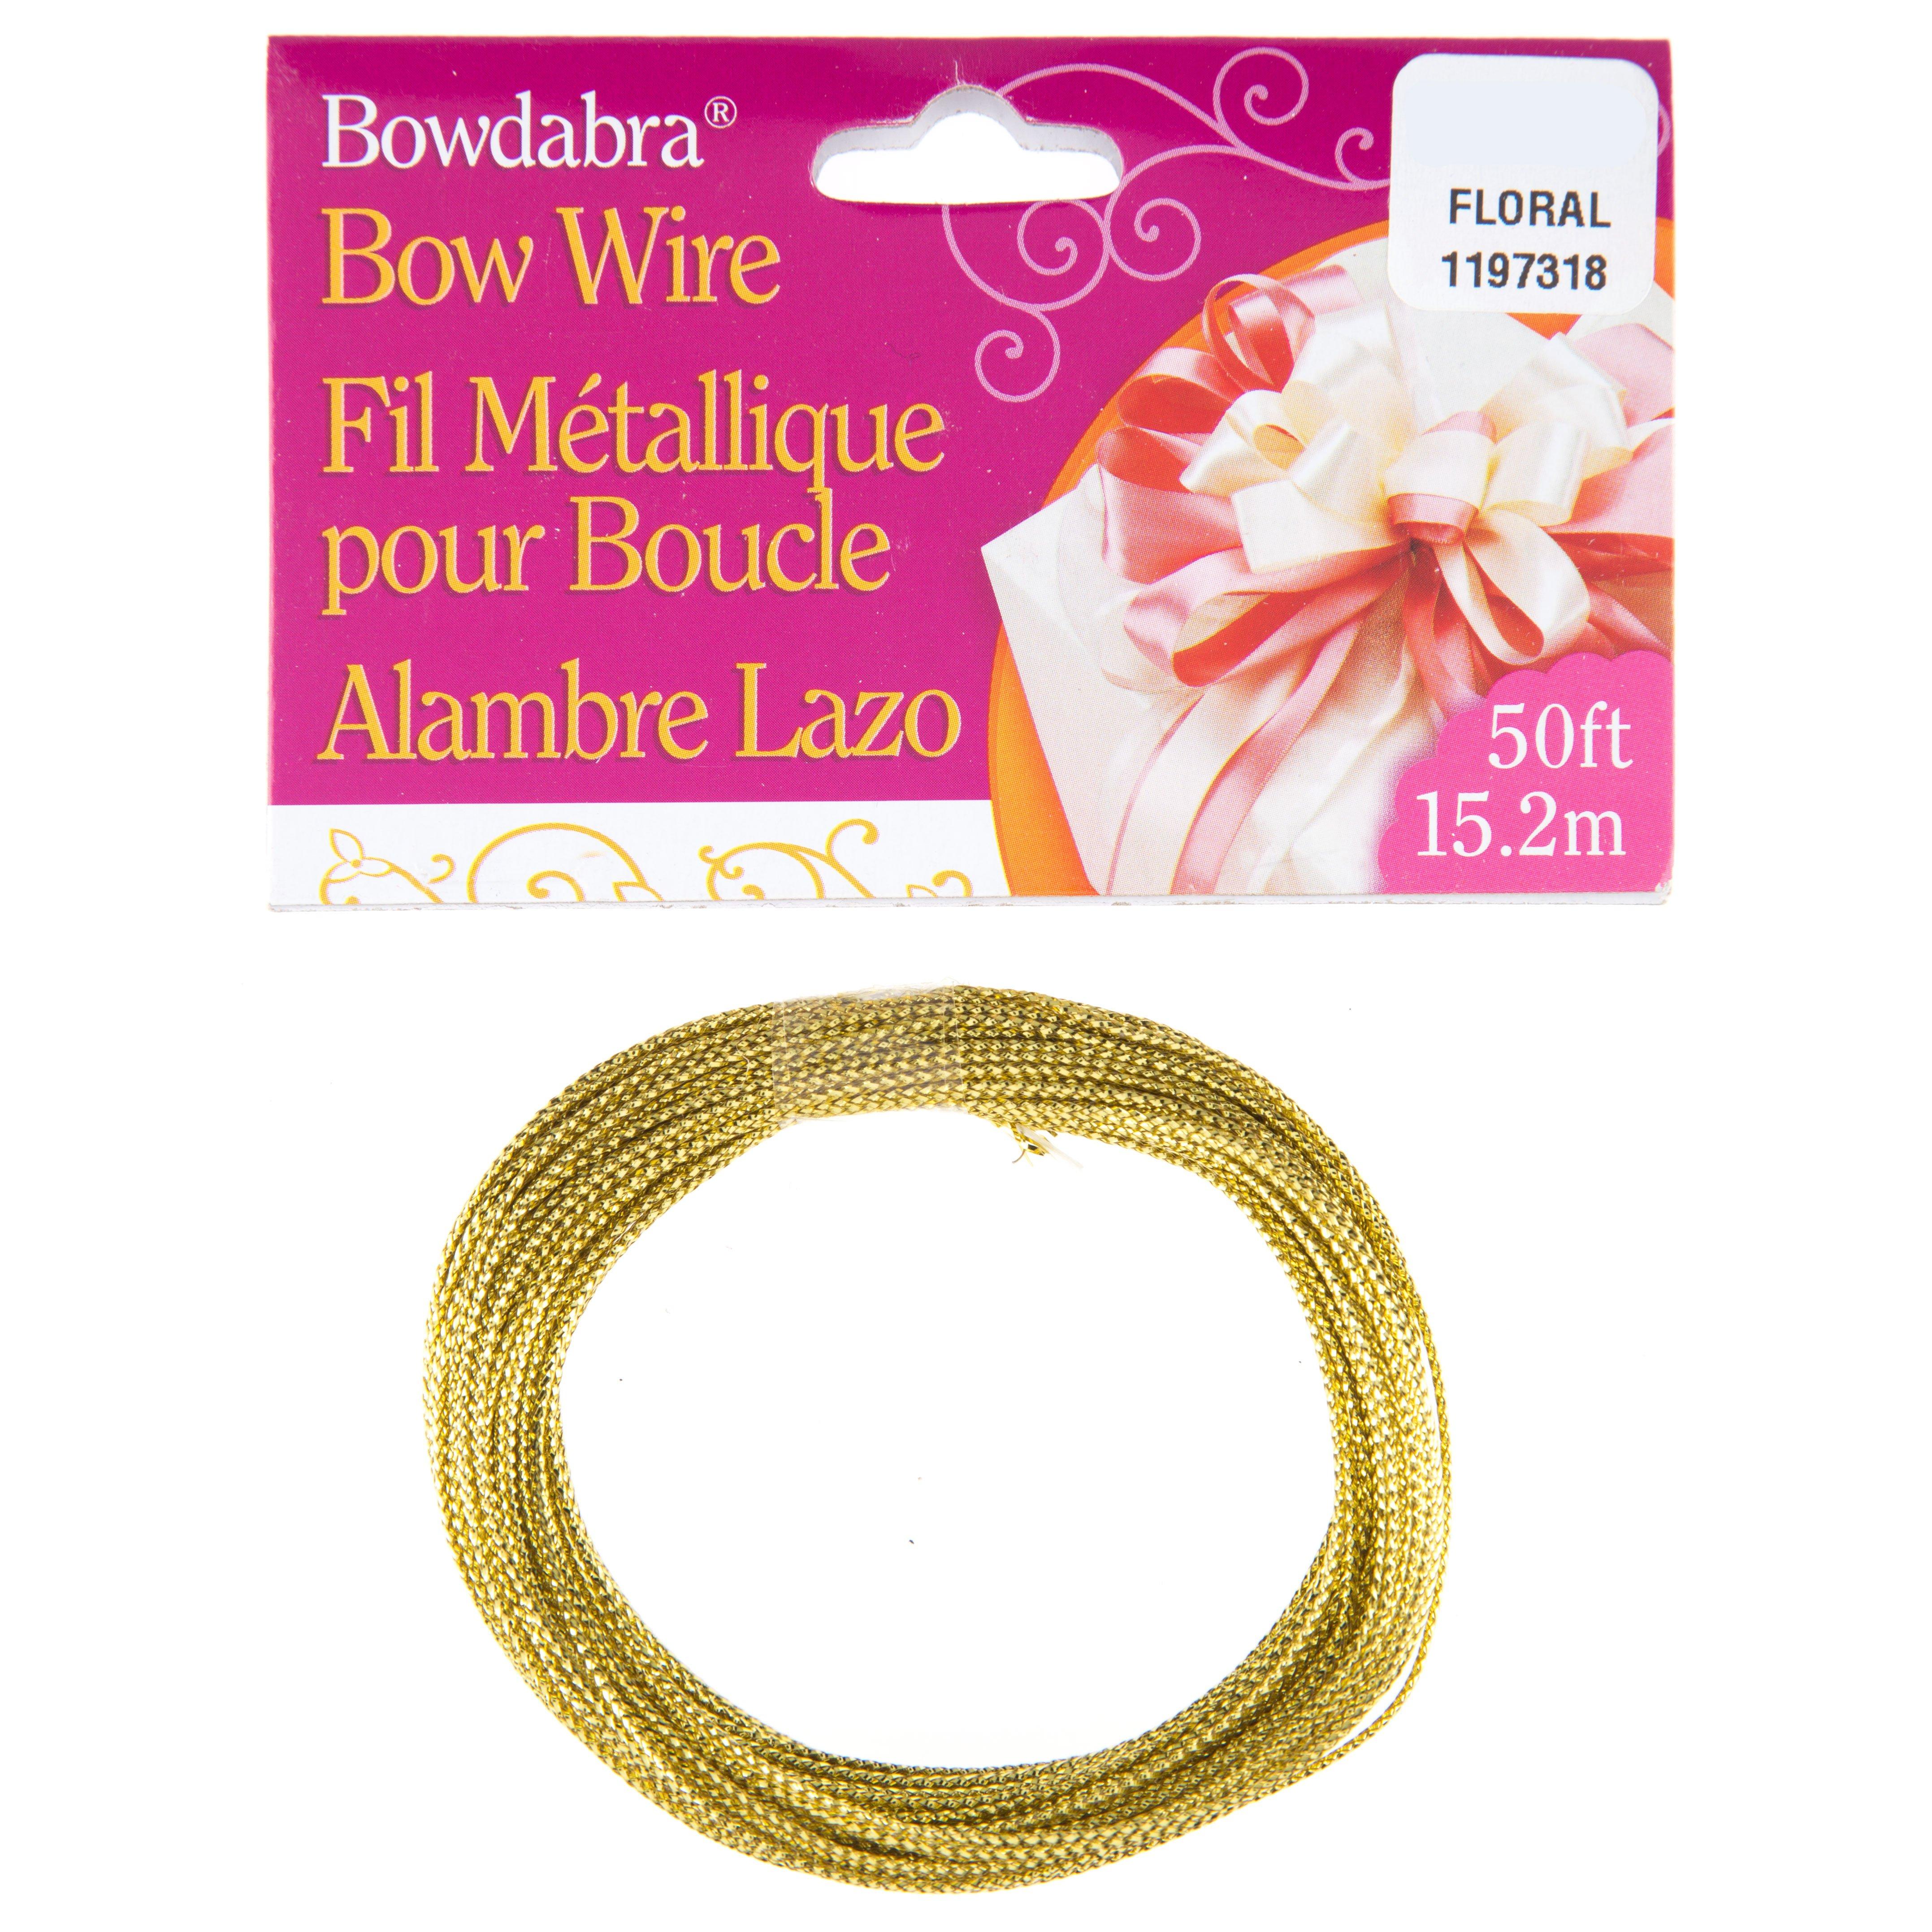 Buy Gold Bow Wire Online: Bowdabra Crafting Bow Wire Value Pack